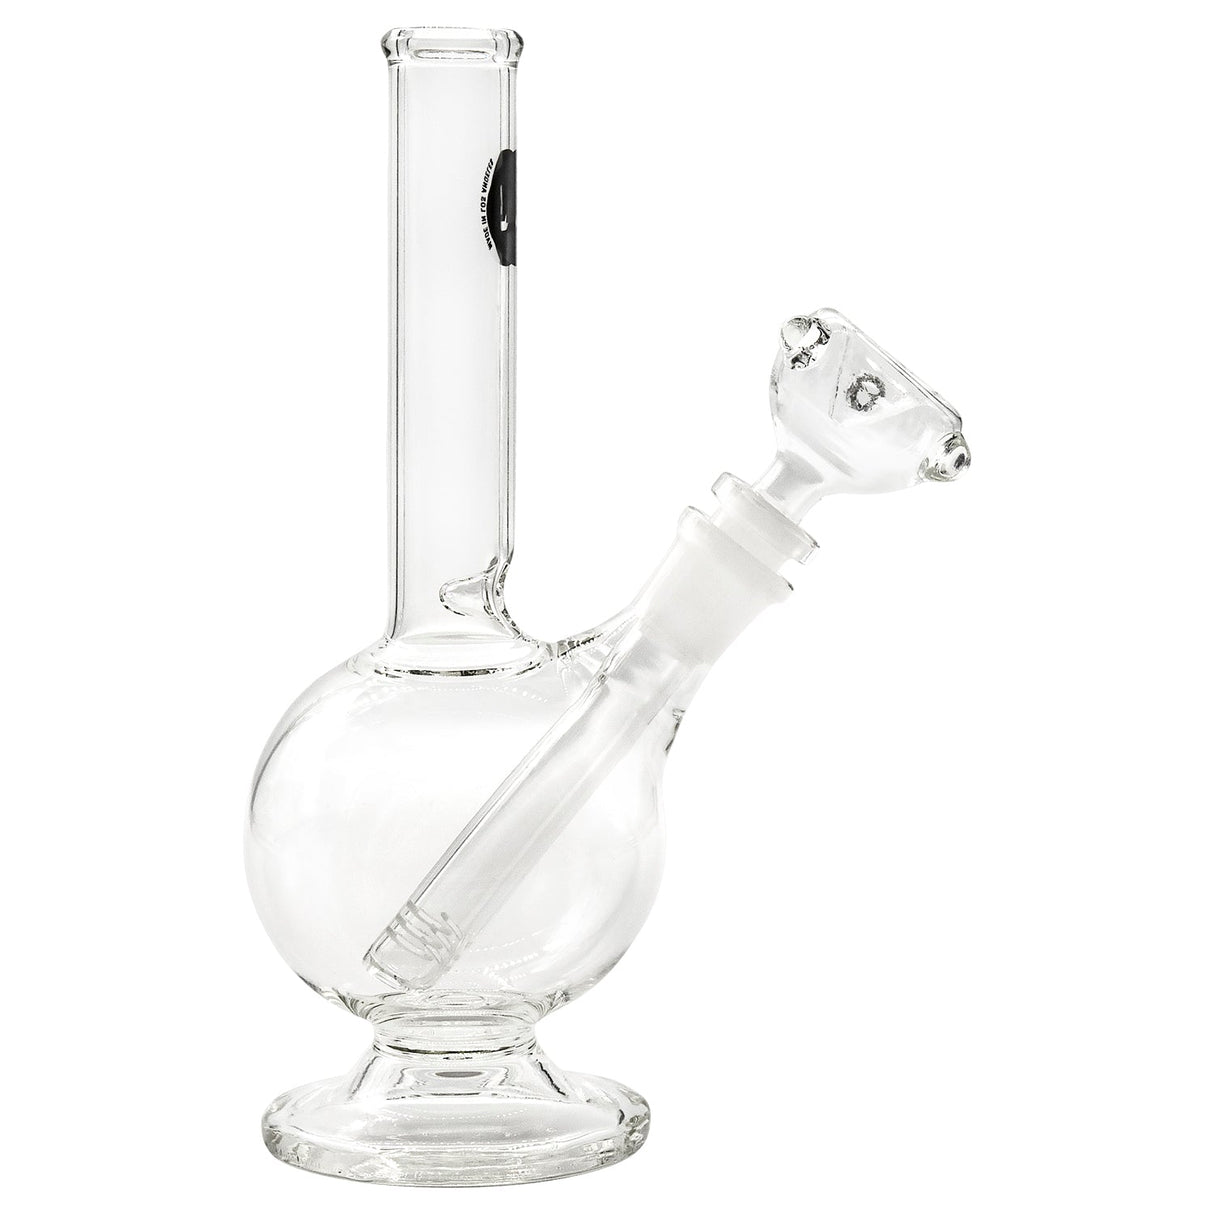 LA Pipes Pedestal Basic Bong, 8" Borosilicate Glass with 45 Degree Joint, Side View